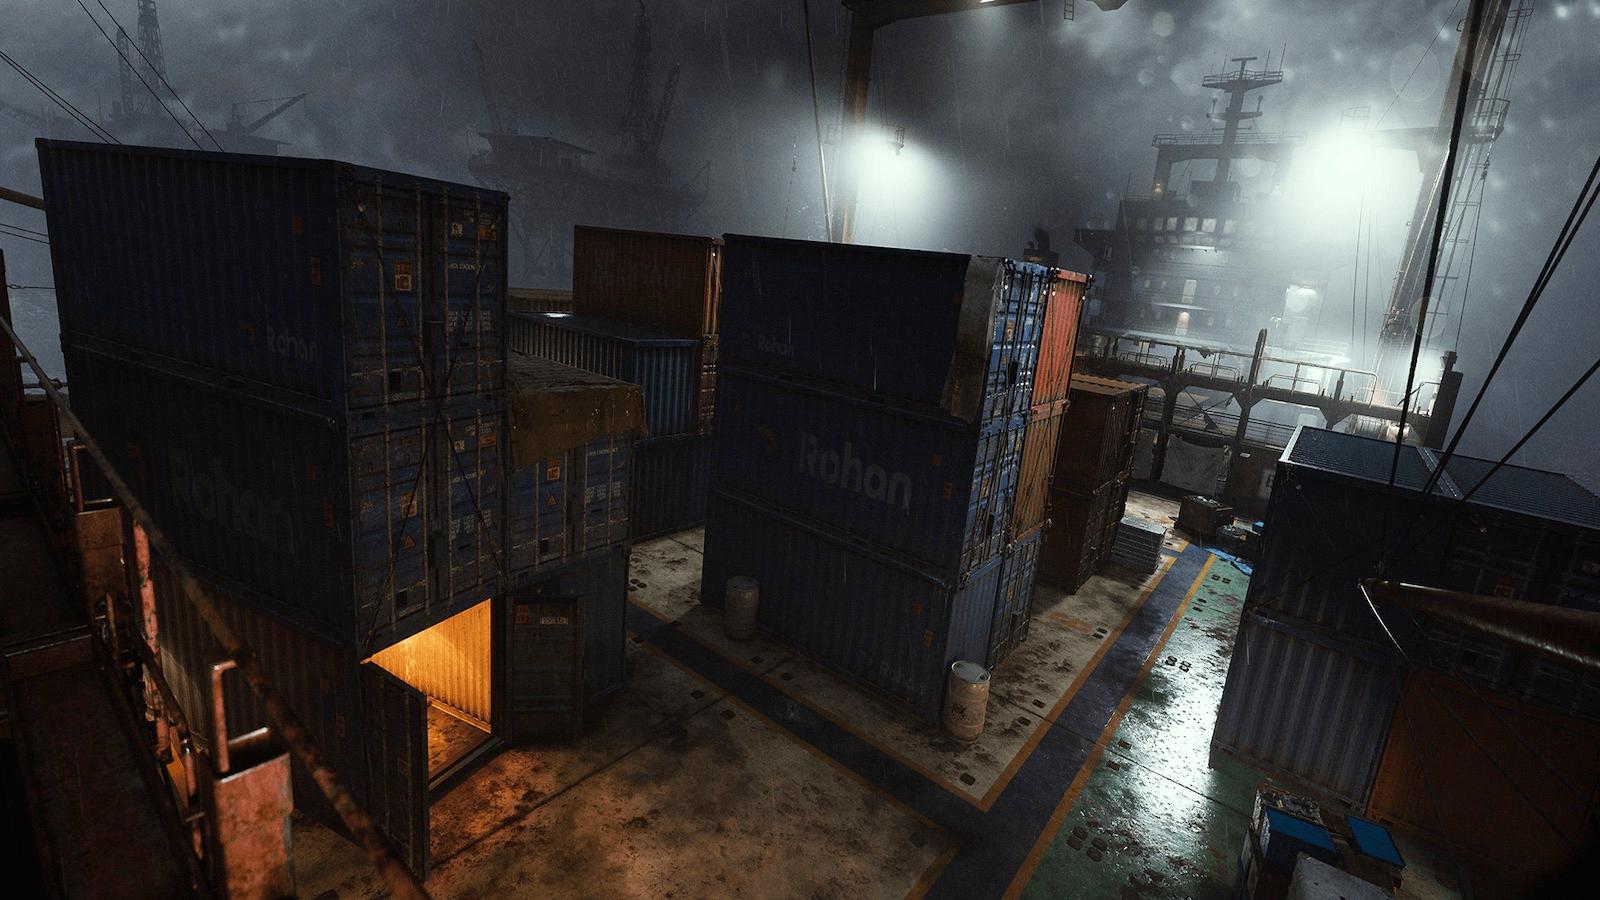 MW3 players furious over Shipment being “stupidly dark” Dexerto